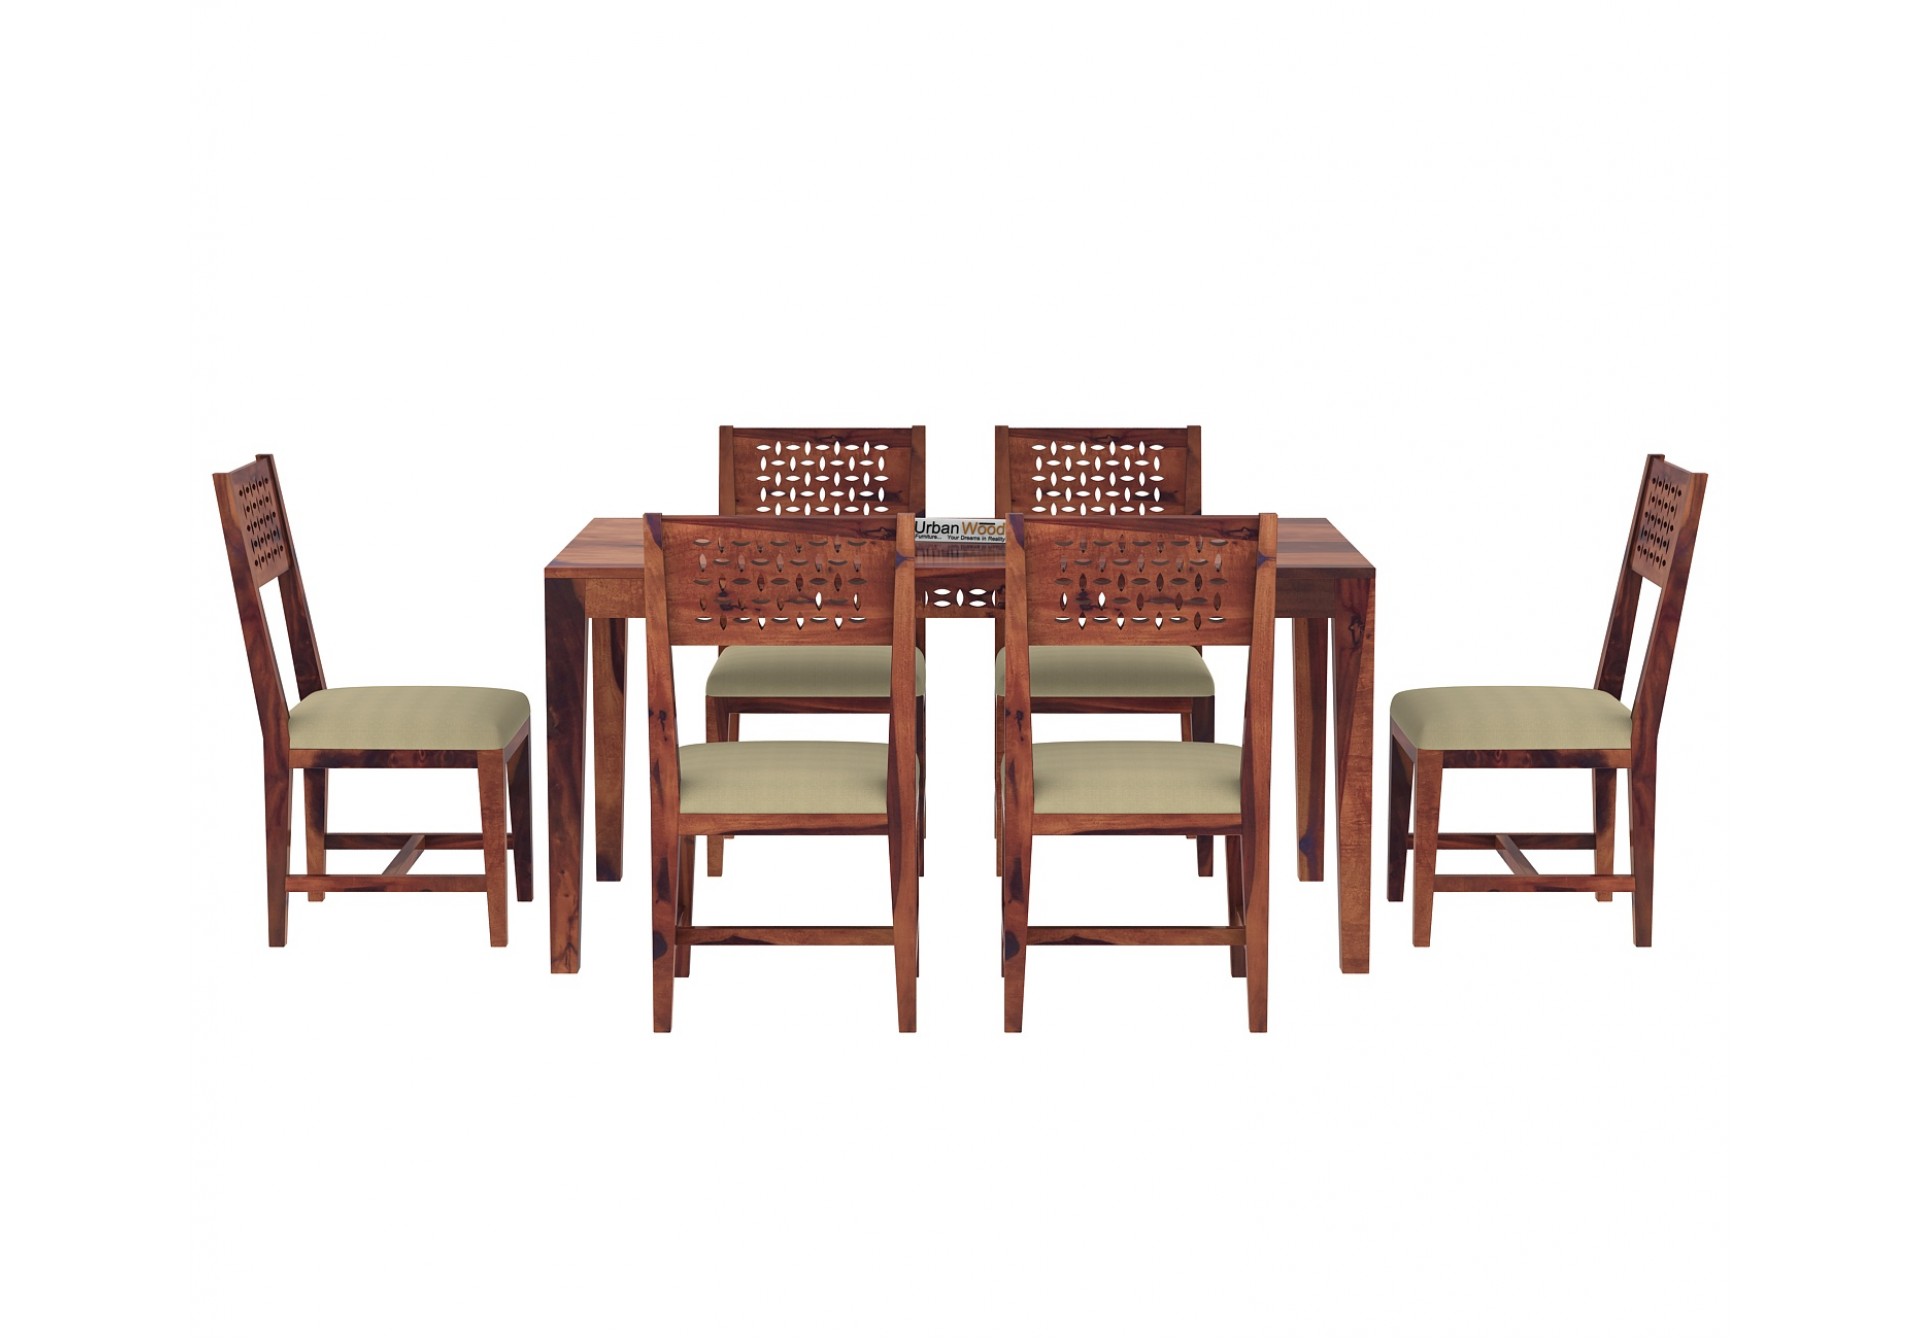 Woodora 6 Seater Dining Set with Cushion 